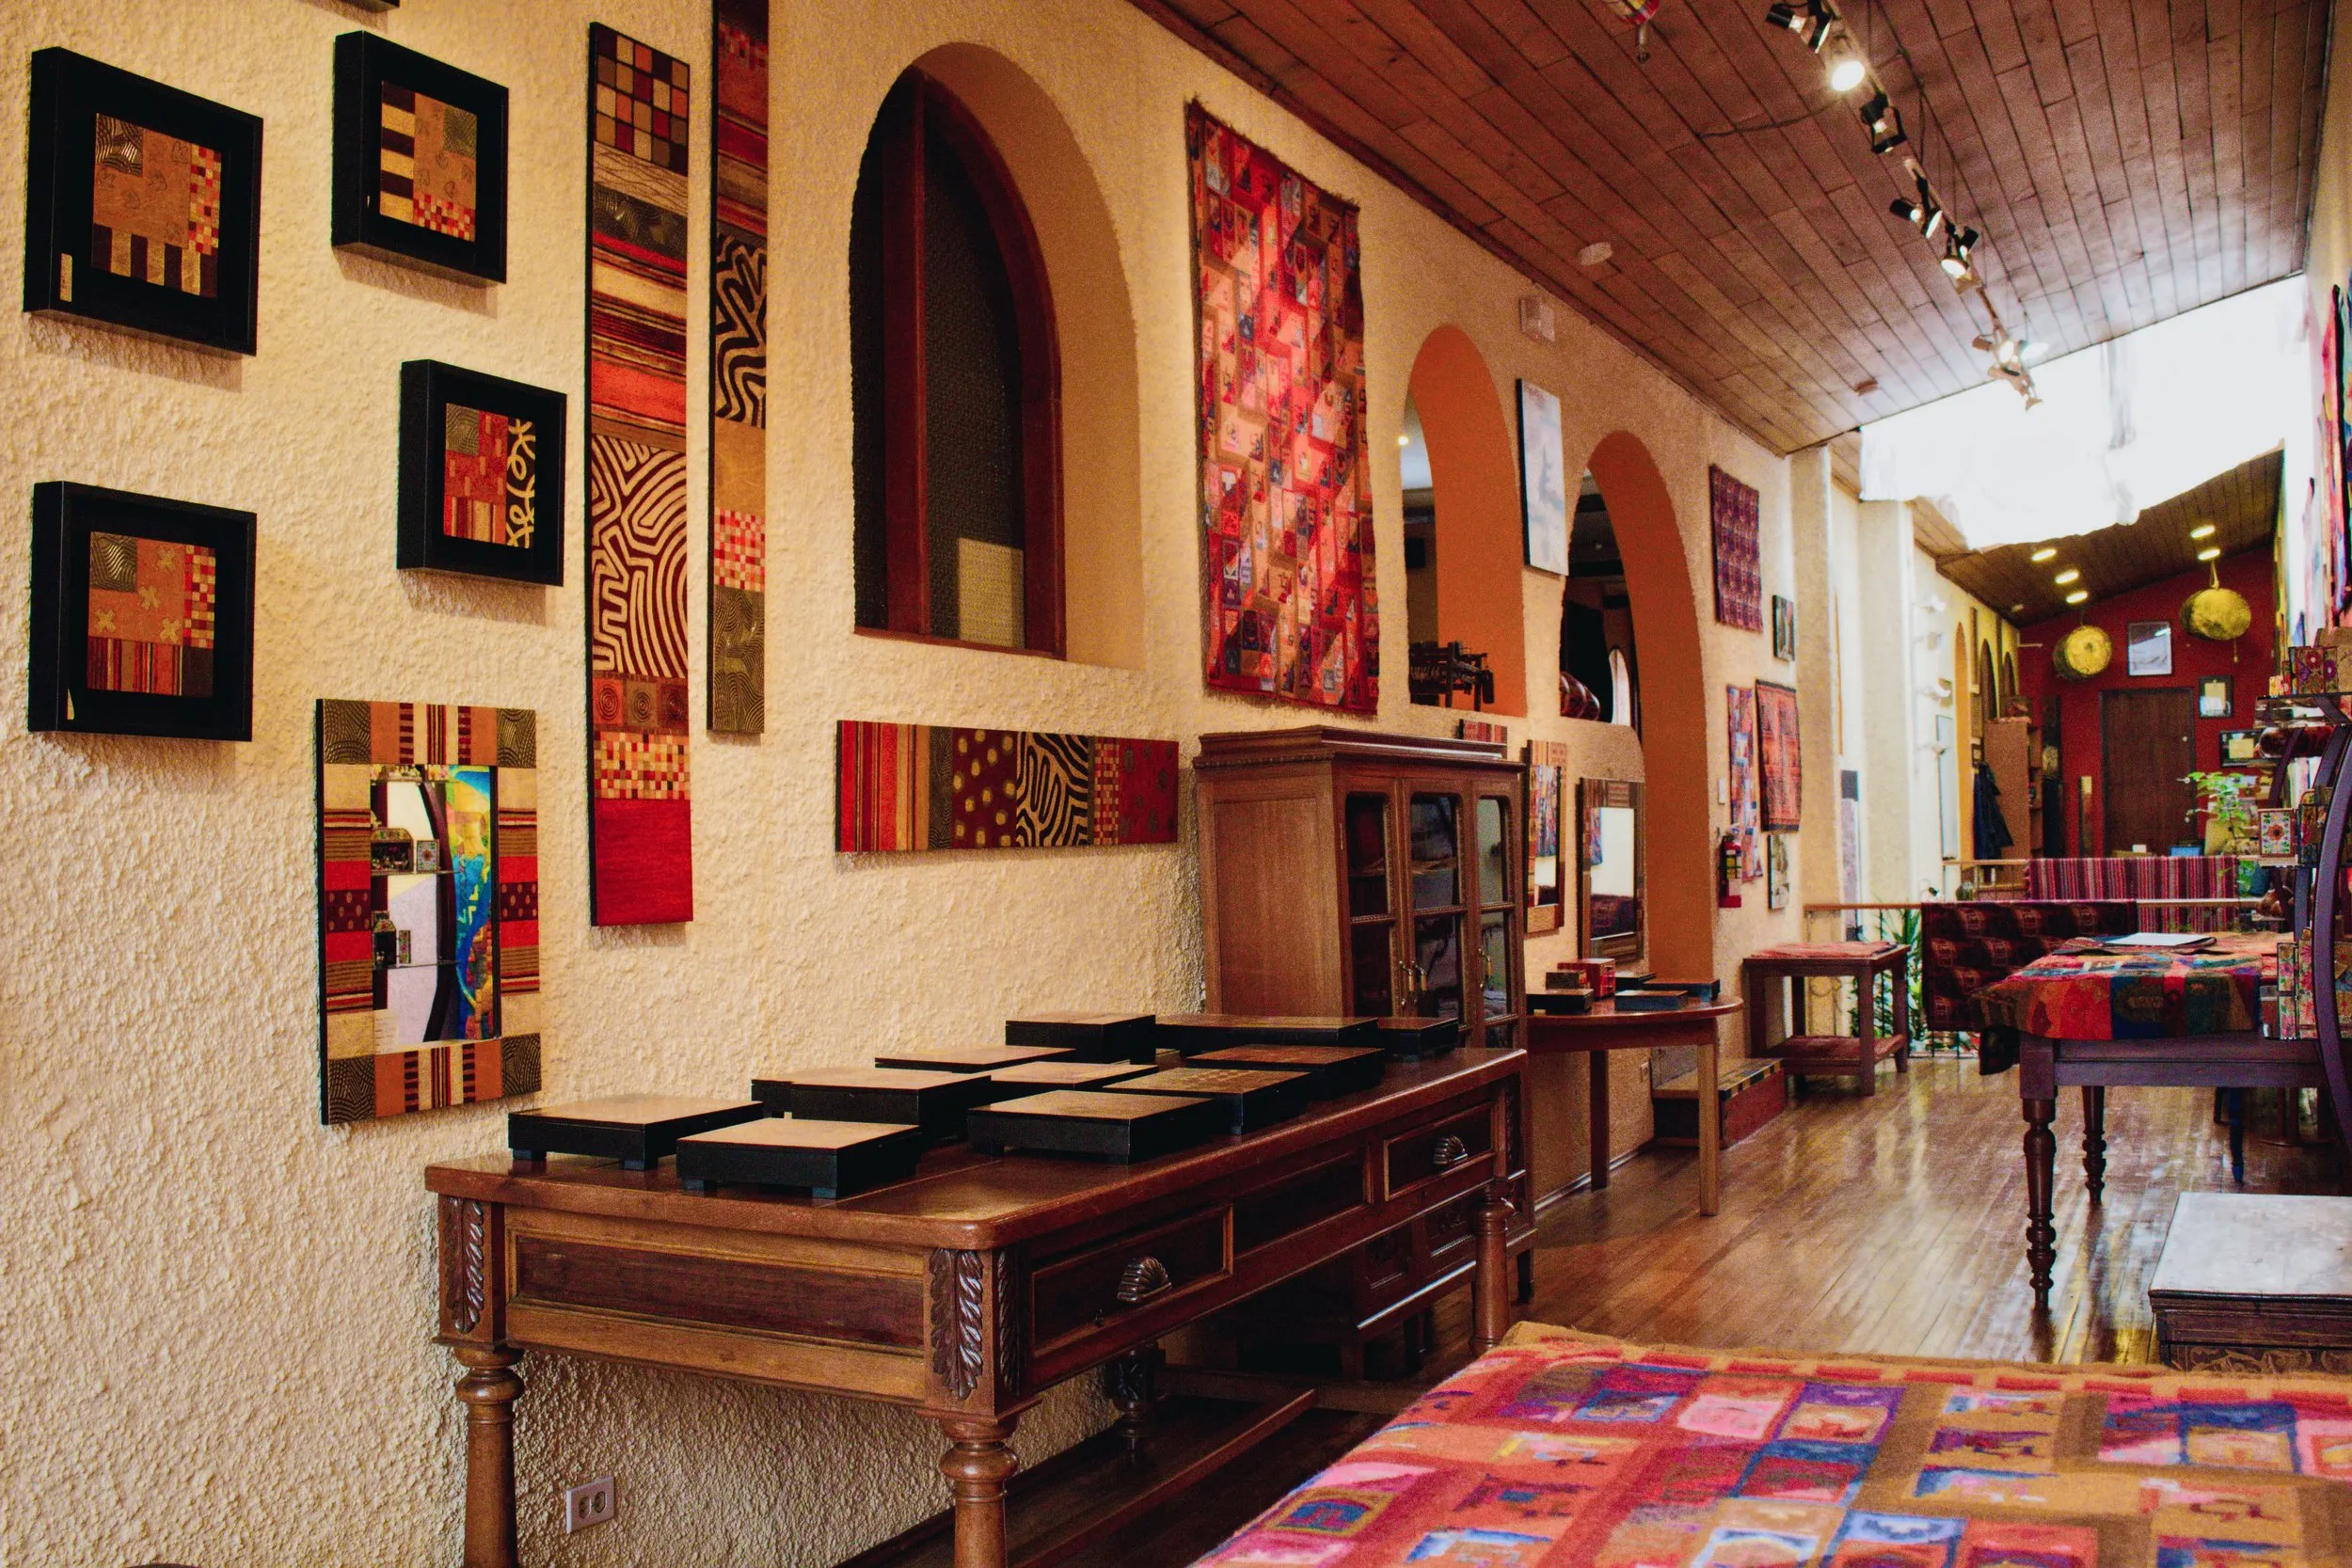 Latin Gallery in Ecuador, south_america | Other Crafts,Handicrafts - Country Helper